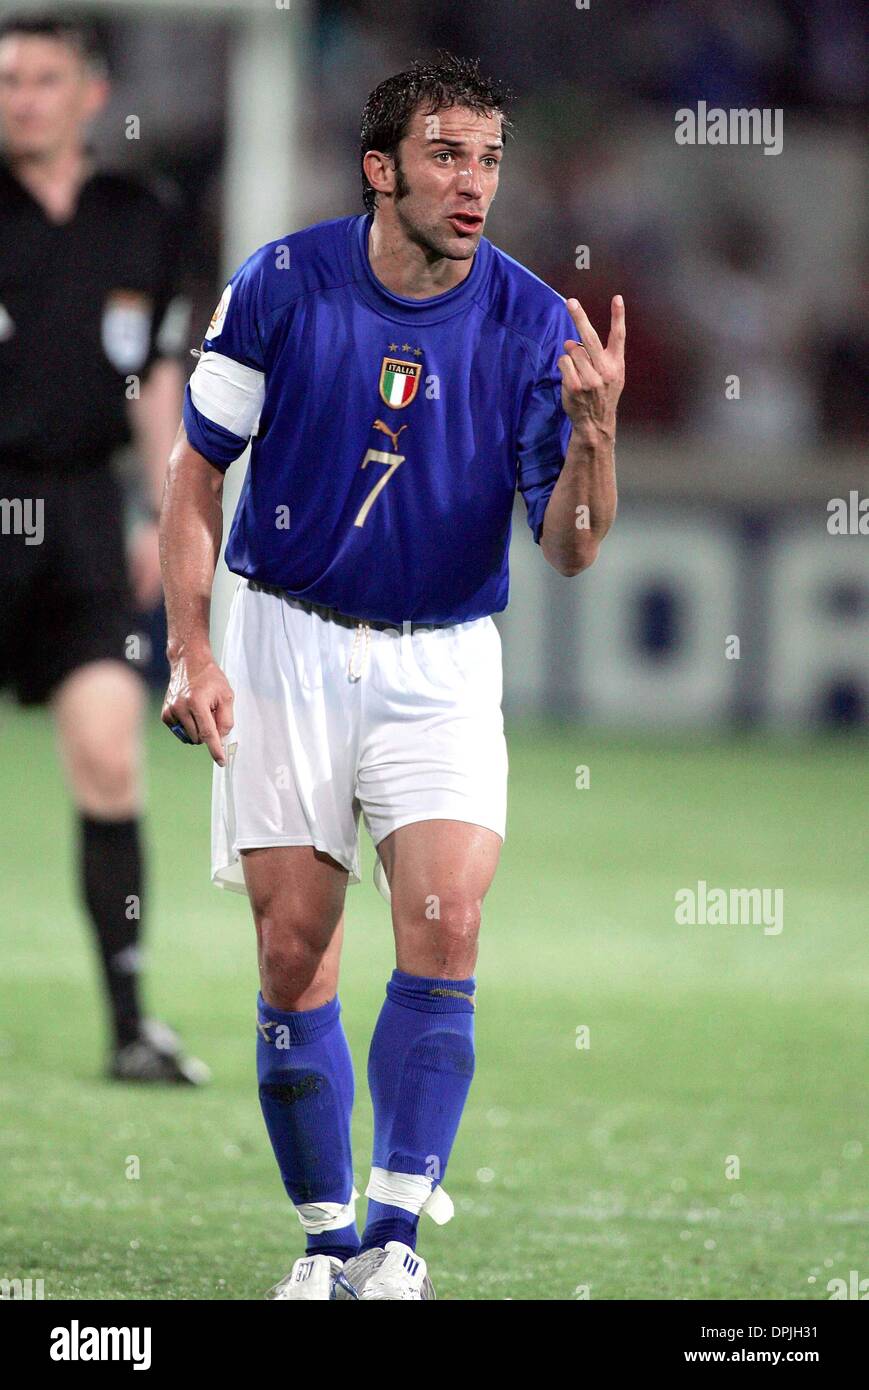 ALESSANDRO DEL PIERO.ITALY & JUVENTUS.ITALY V BULGARIA EURO 2004.D. AFONSO HENRIQUES STADIUM, GUIMARAES, PORTUGAL.22/06/2004.DIG24987.K47872.WORLD CUP PREVIEW 2006 Stock Photo